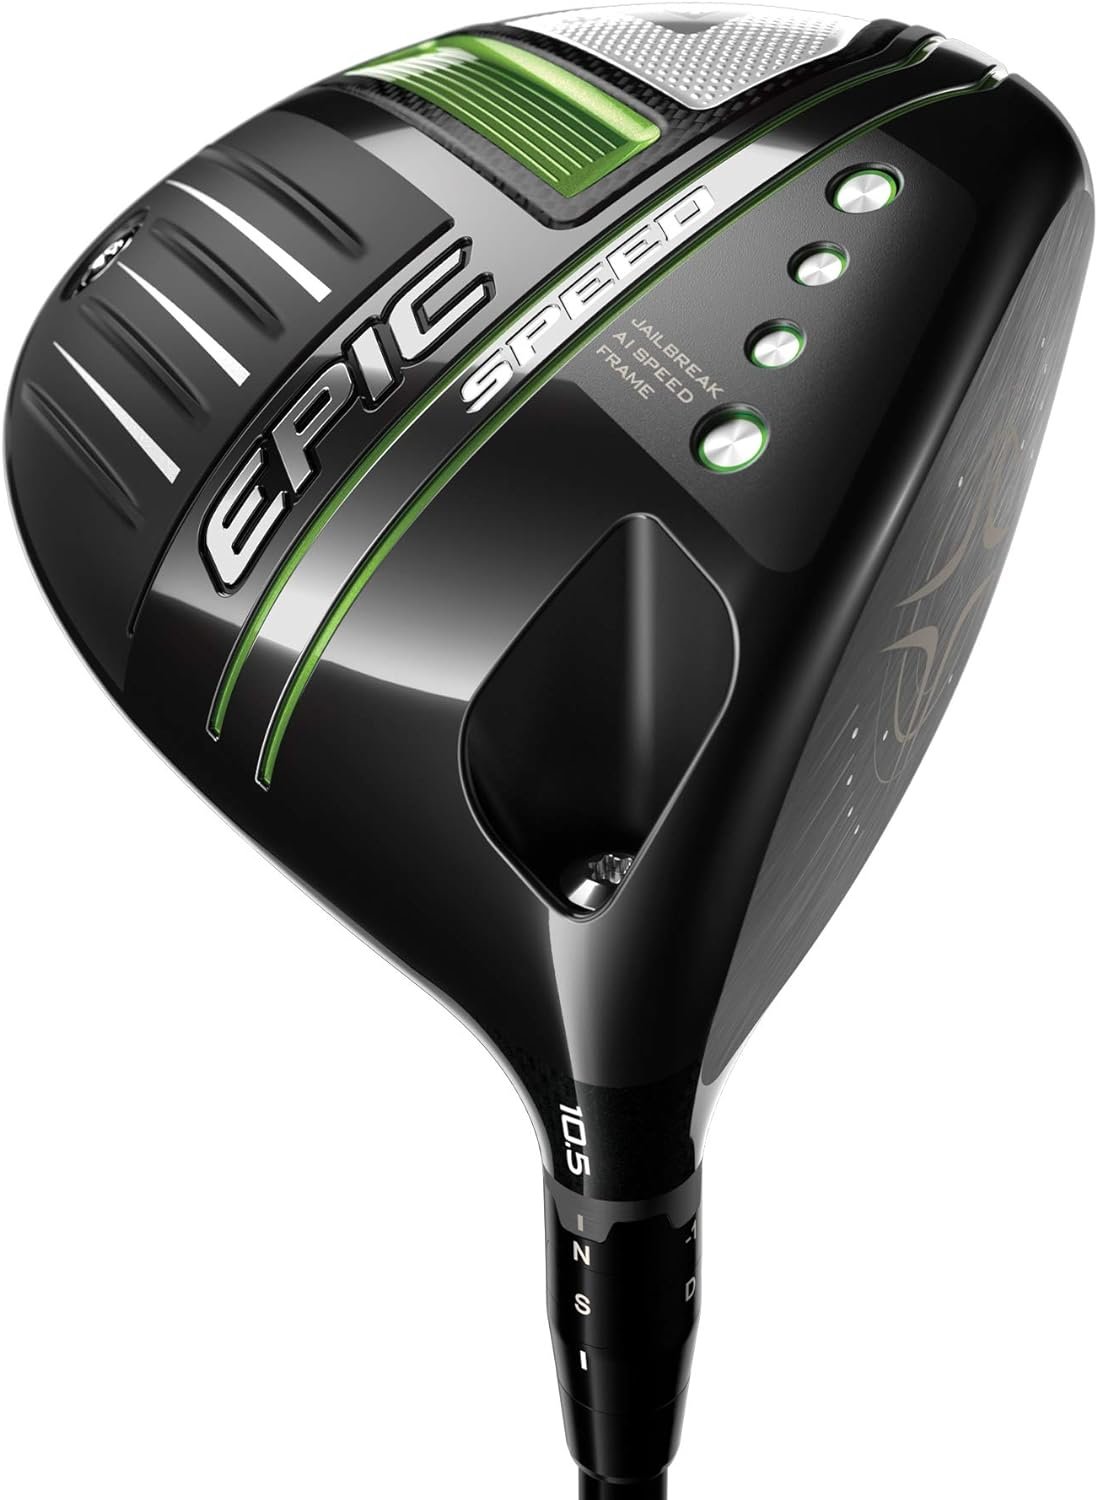 Golf Iron Head Covers vs. Callaway Epic Speed Driver: A Review